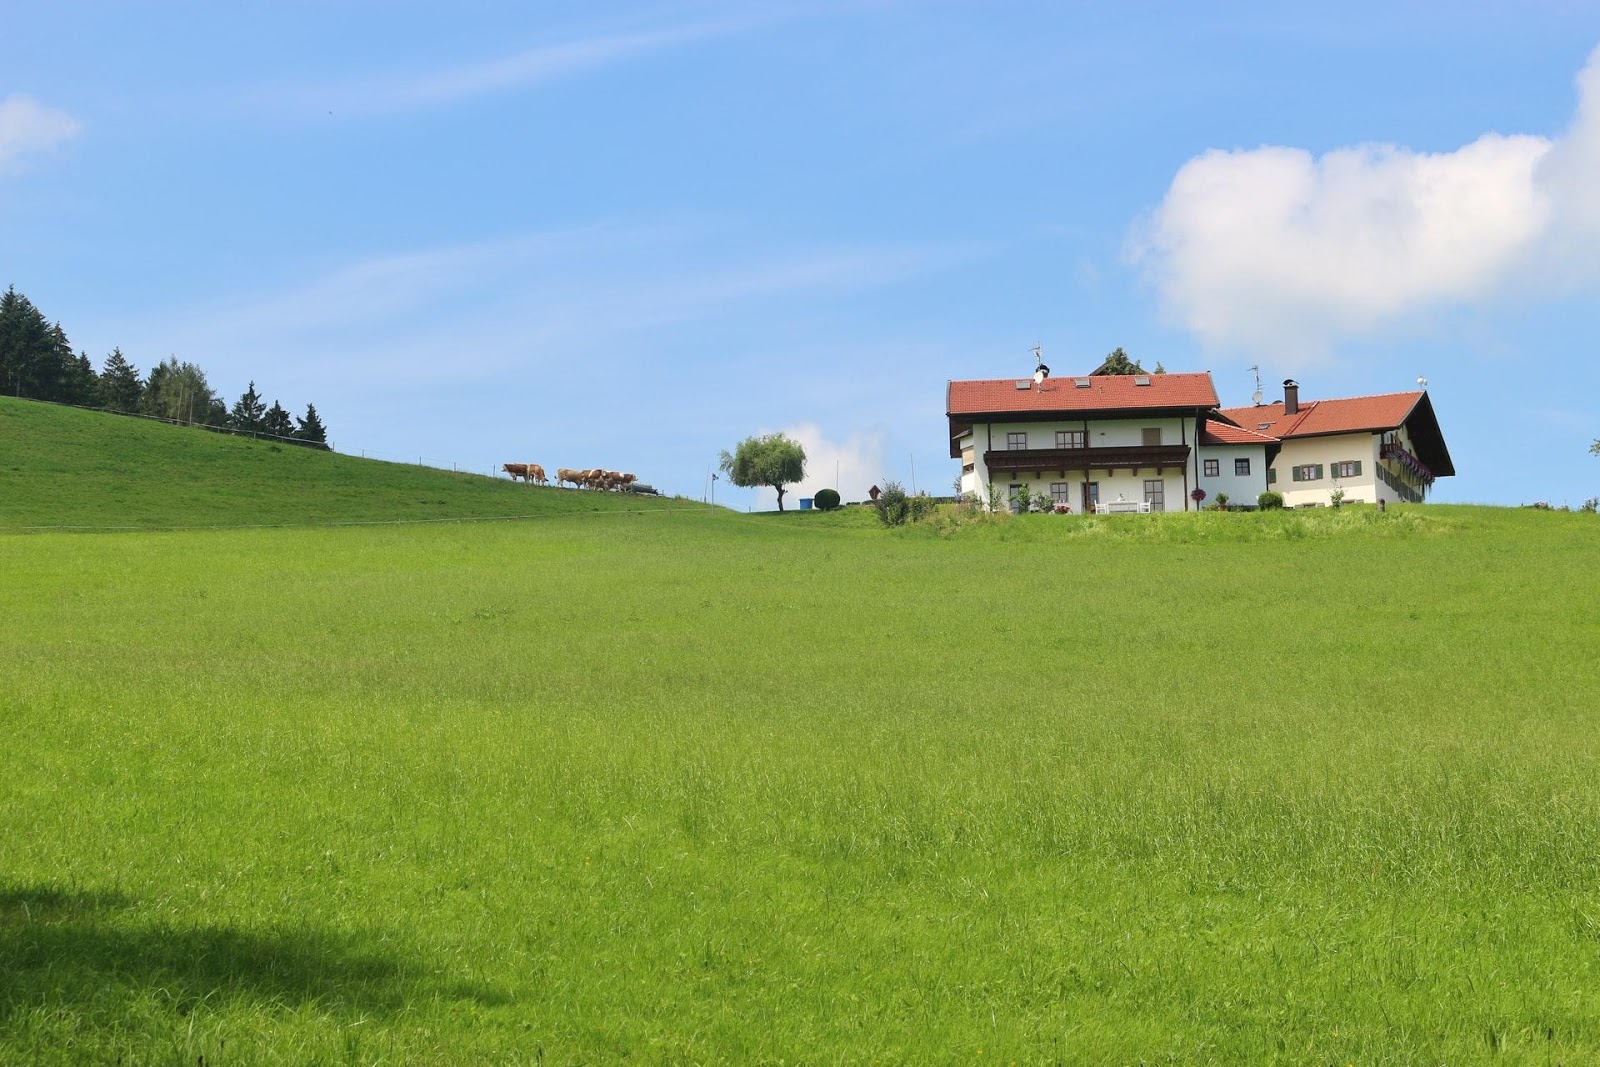 small houses on a field of grass